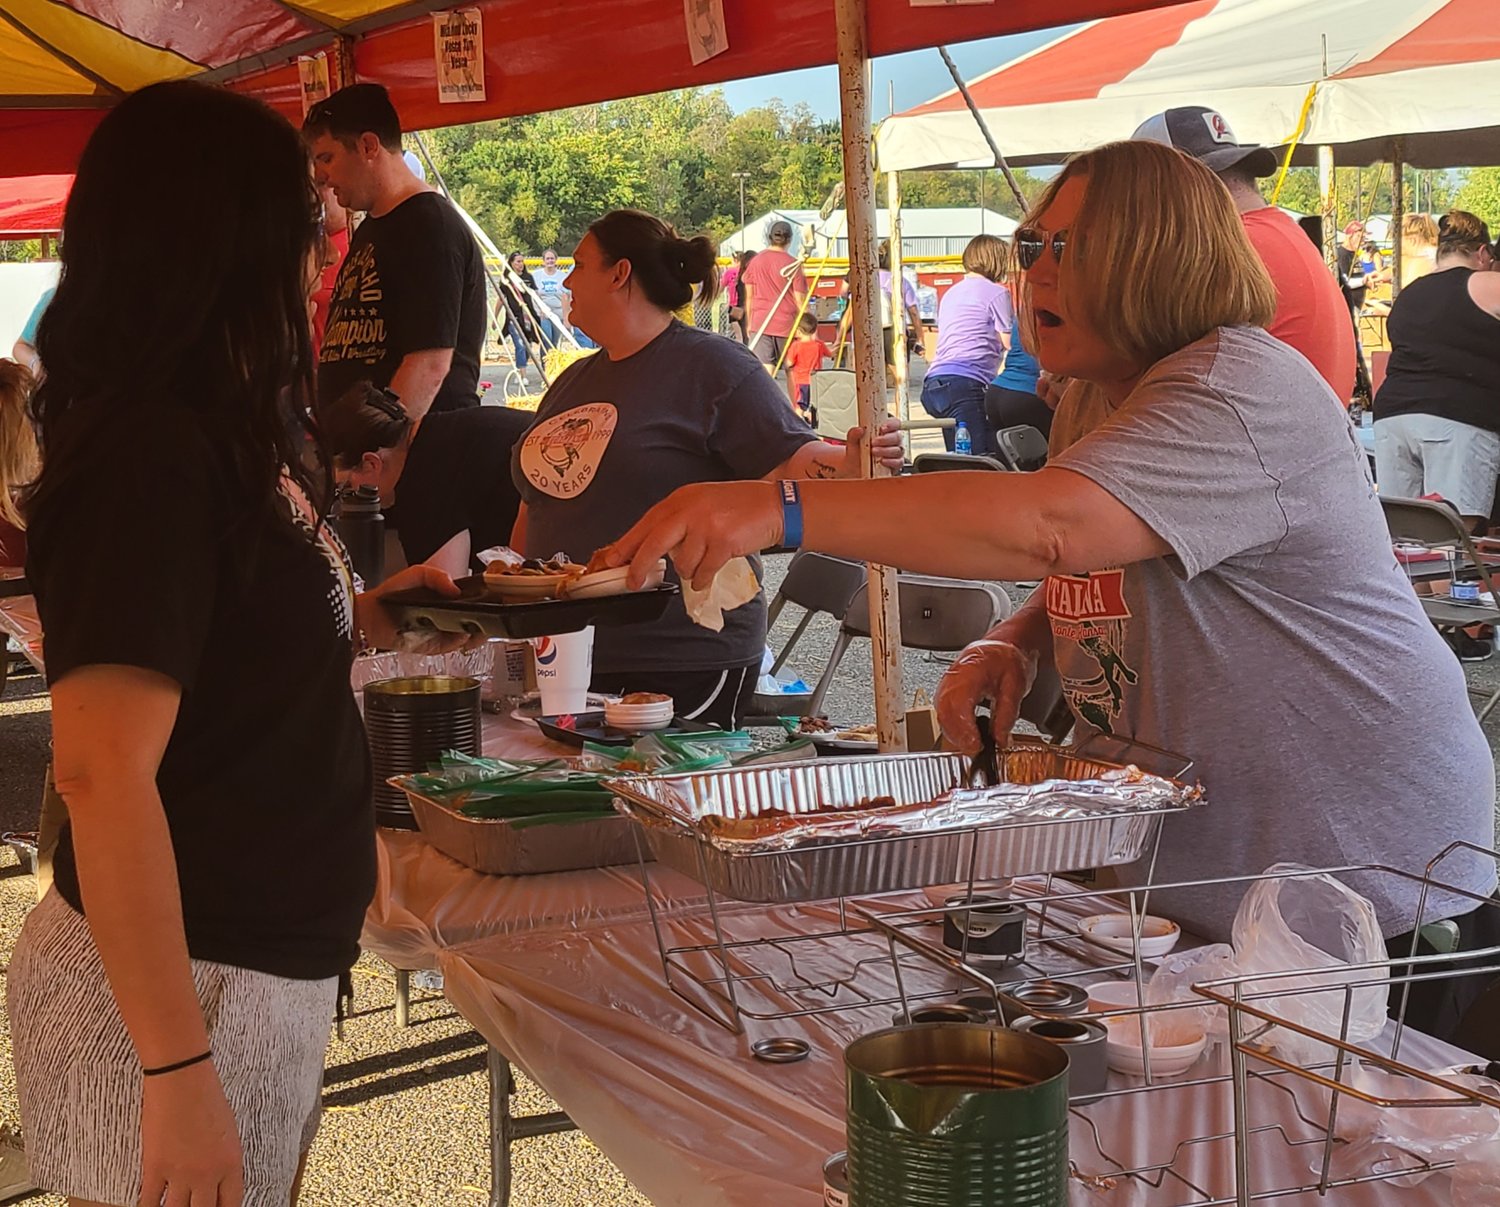 Janelle Pyle, one of the volunteer cooks, serves pasta at the annual Festa Italiana on Saturday.